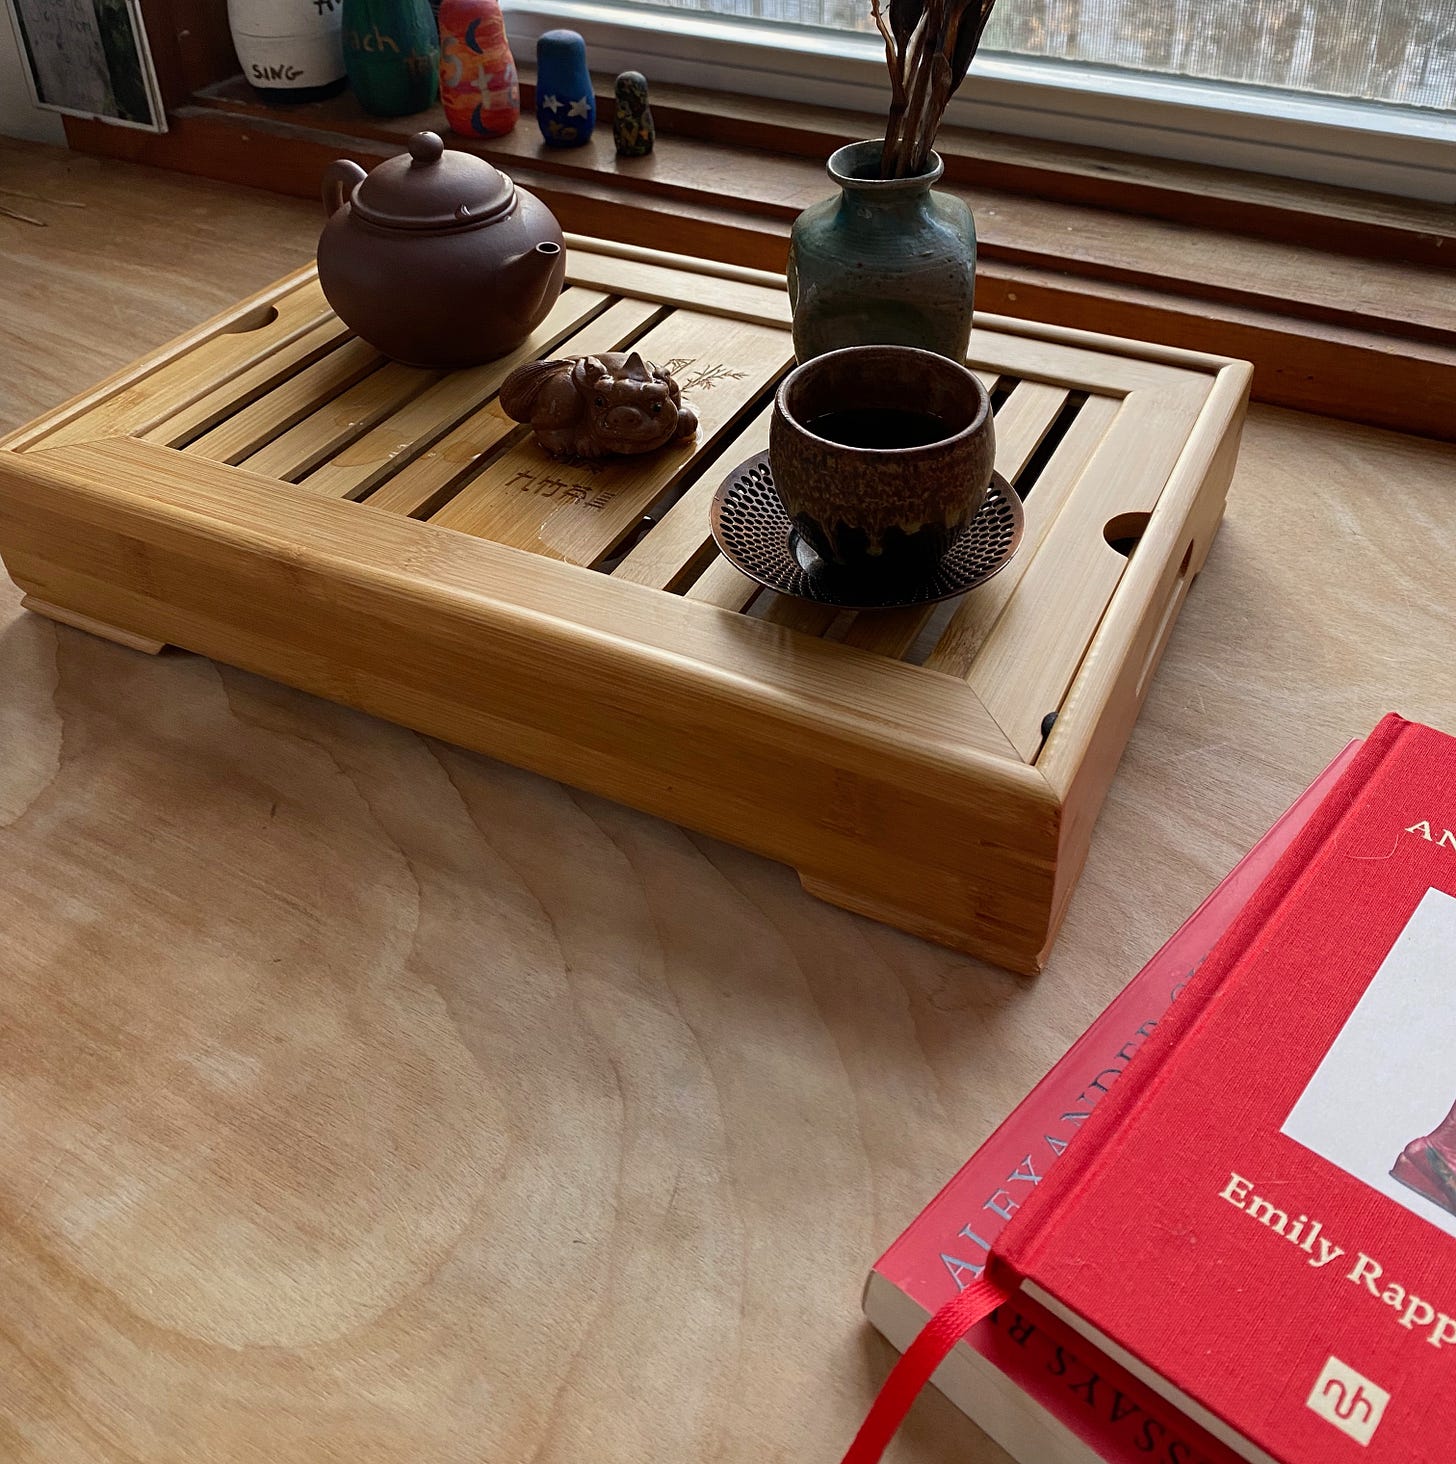 A bamboo tea tray holding a small brown teapot, tea dragon, round cup on a saucer, and small ceramic vase sits on a wooden desk under a window next to two partially-visible books.